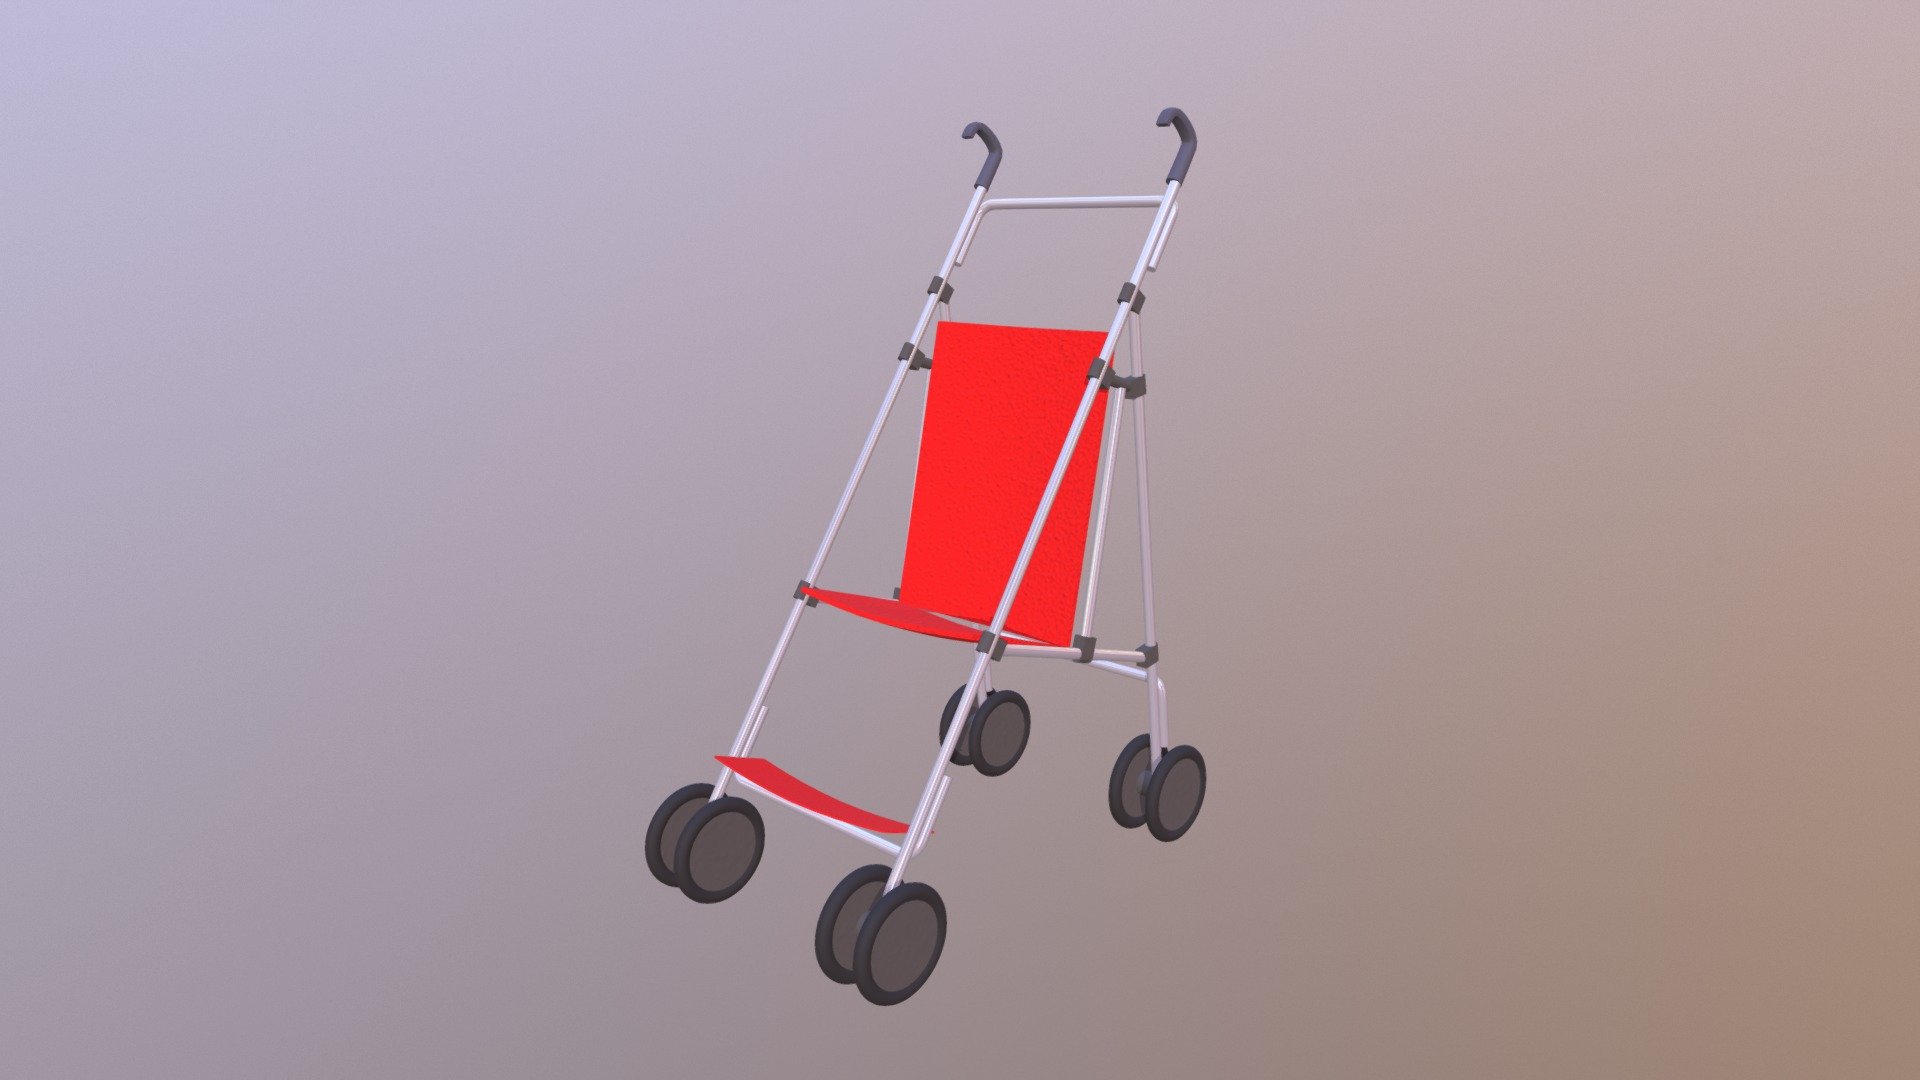 This is a model of a typical 4-wheeled stroller, typically used for carrying infants and babies, small children, and toddlers.


Approx 19,902 polygons.
Made entirely with 3 and 4 point polygons.
Includes group information, which your software should interpret as separate parts, which includes: 2 front wheels, 2 rear wheels.
Although the model includes these parts, this version of the model is not rigged.
Includes logically named materials, such as Tires, Plastic, Metal, and Fabric. This makes it very easy to recolor the model.
The model has basic UV mapping and a &ldquo;fabric